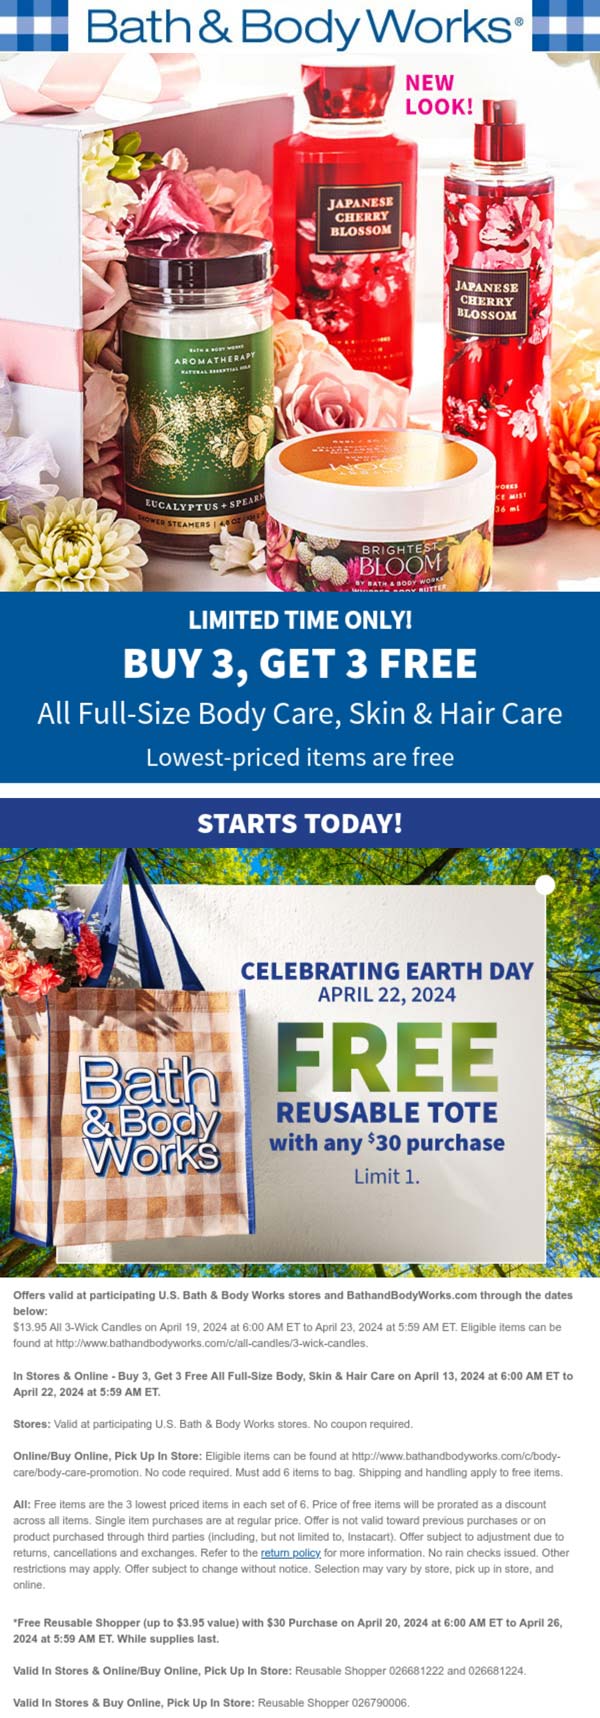 Bath & Body Works stores Coupon  6-for-3 on all body & hair care + free tote at Bath & Body Works, ditto online #bathbodyworks 